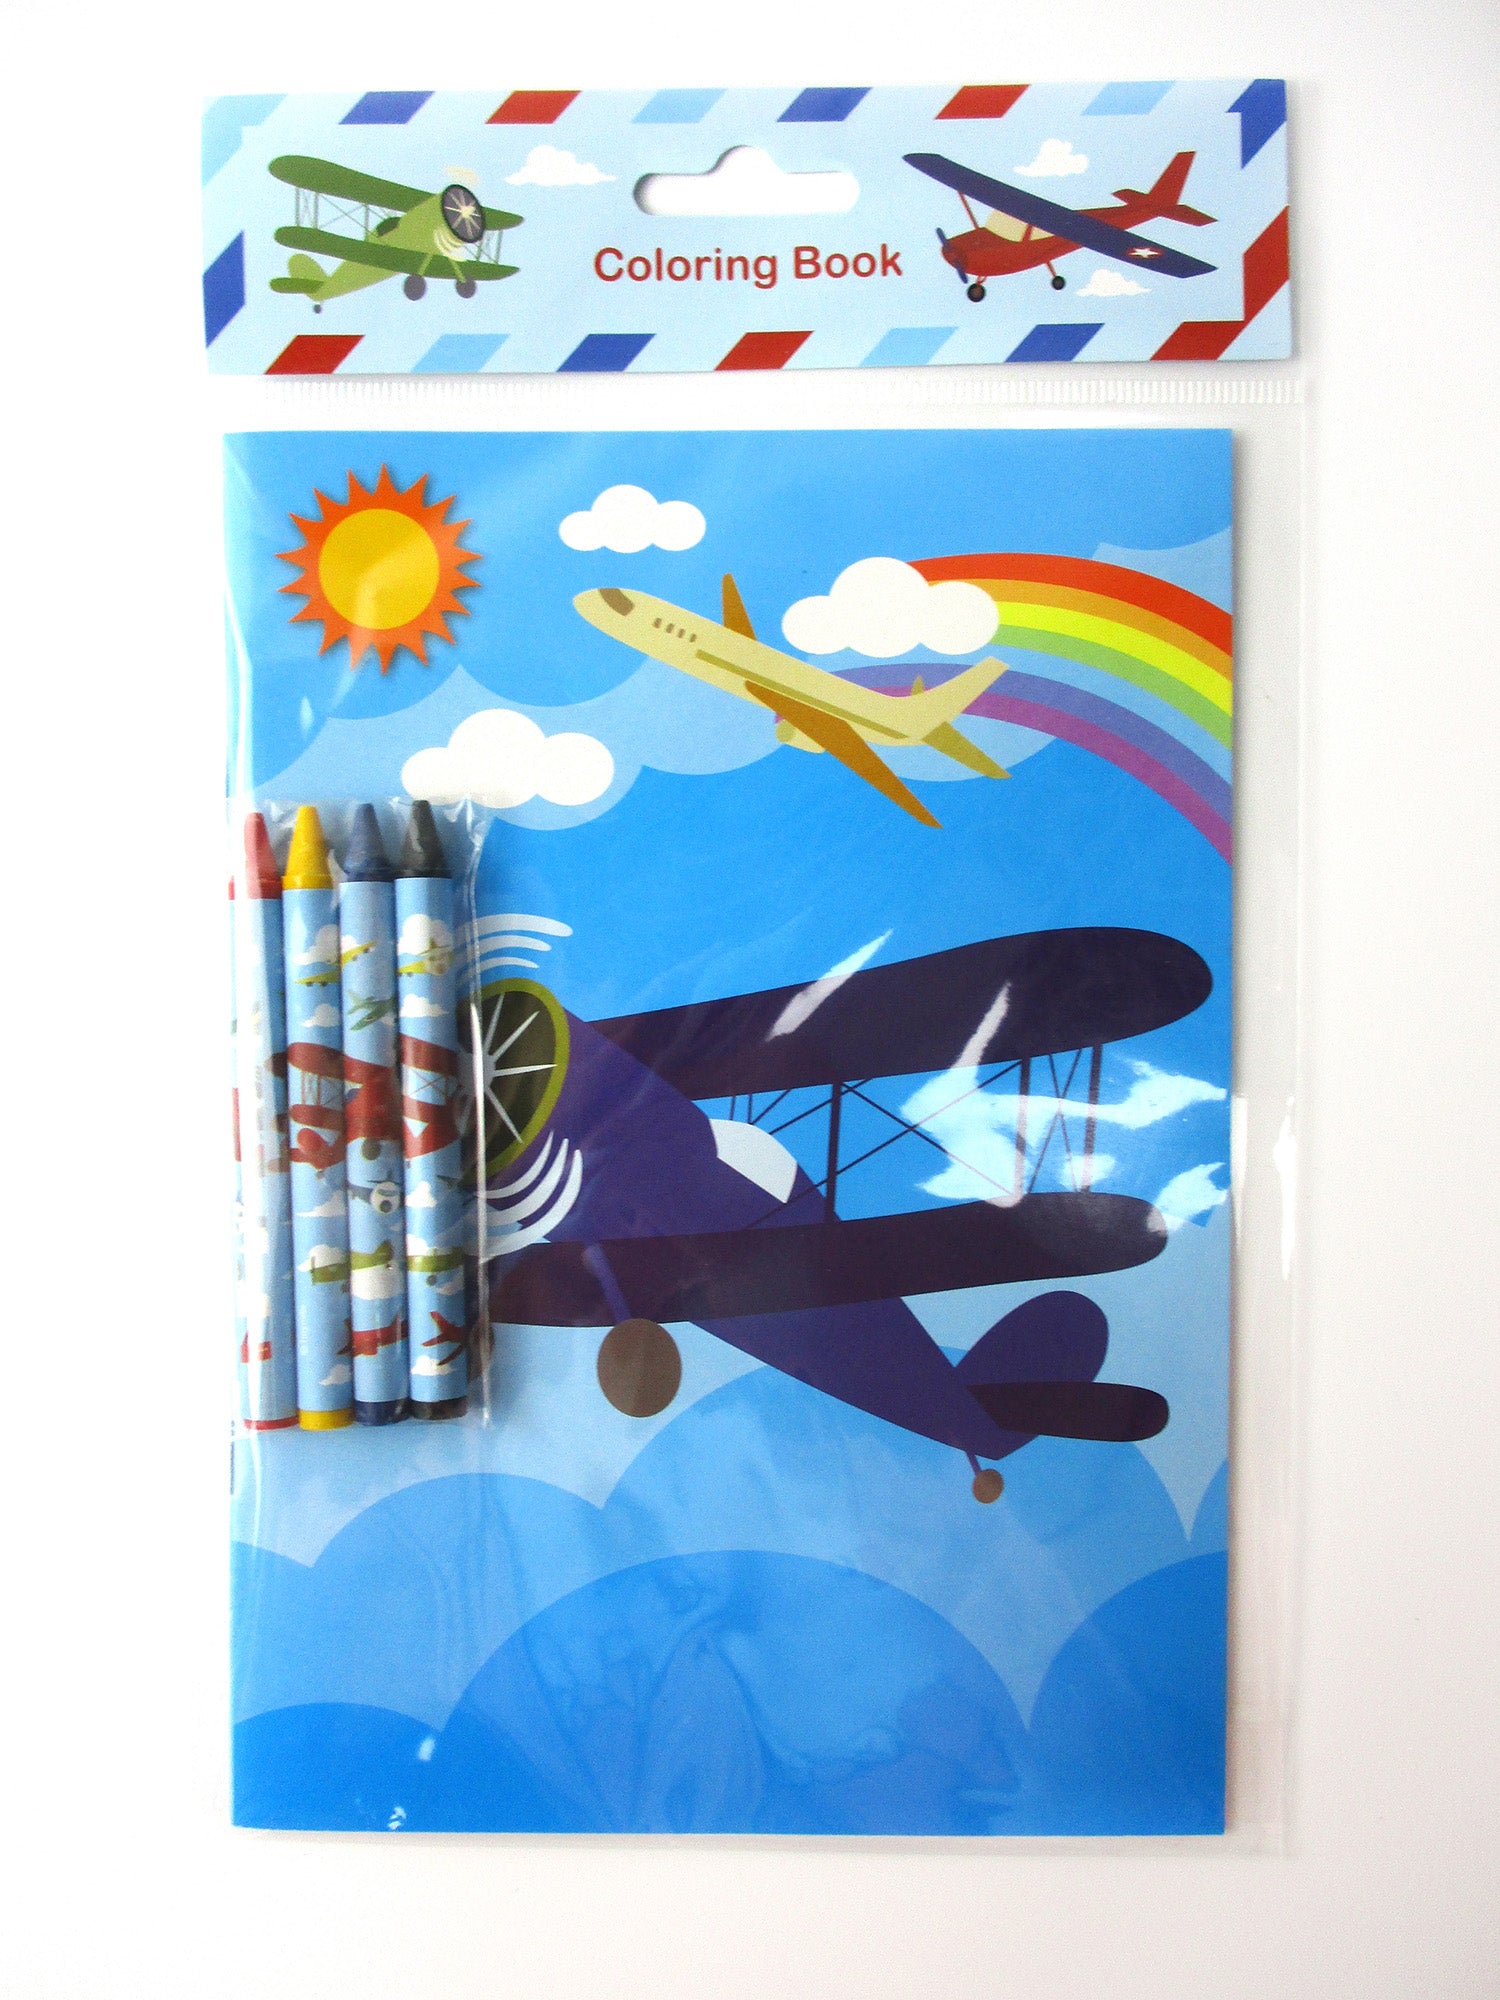 Download Airplane Coloring Books With Crayons Party Favors Set Of 6 Or 12 Tiny Mills